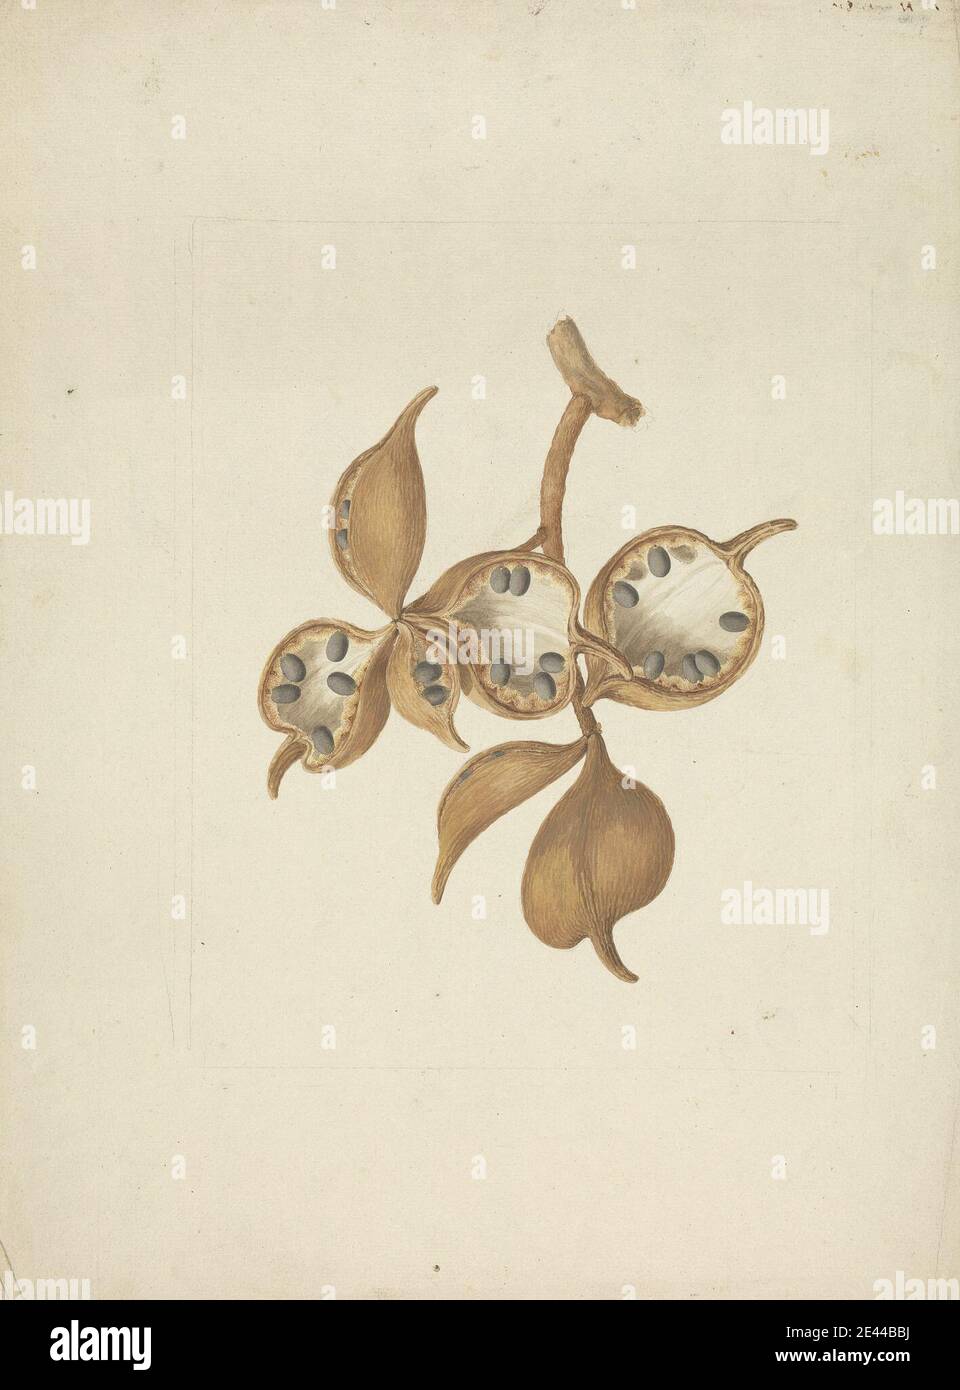 James Bruce, 1730â€“1794, British, Sterculia africana (Lour.) Fiori: finished drawing of stem with seed pods, some open showing seeds, undated. Watercolor and gouache over graphite on medium, slightly textured, cream laid paper. Stock Photo